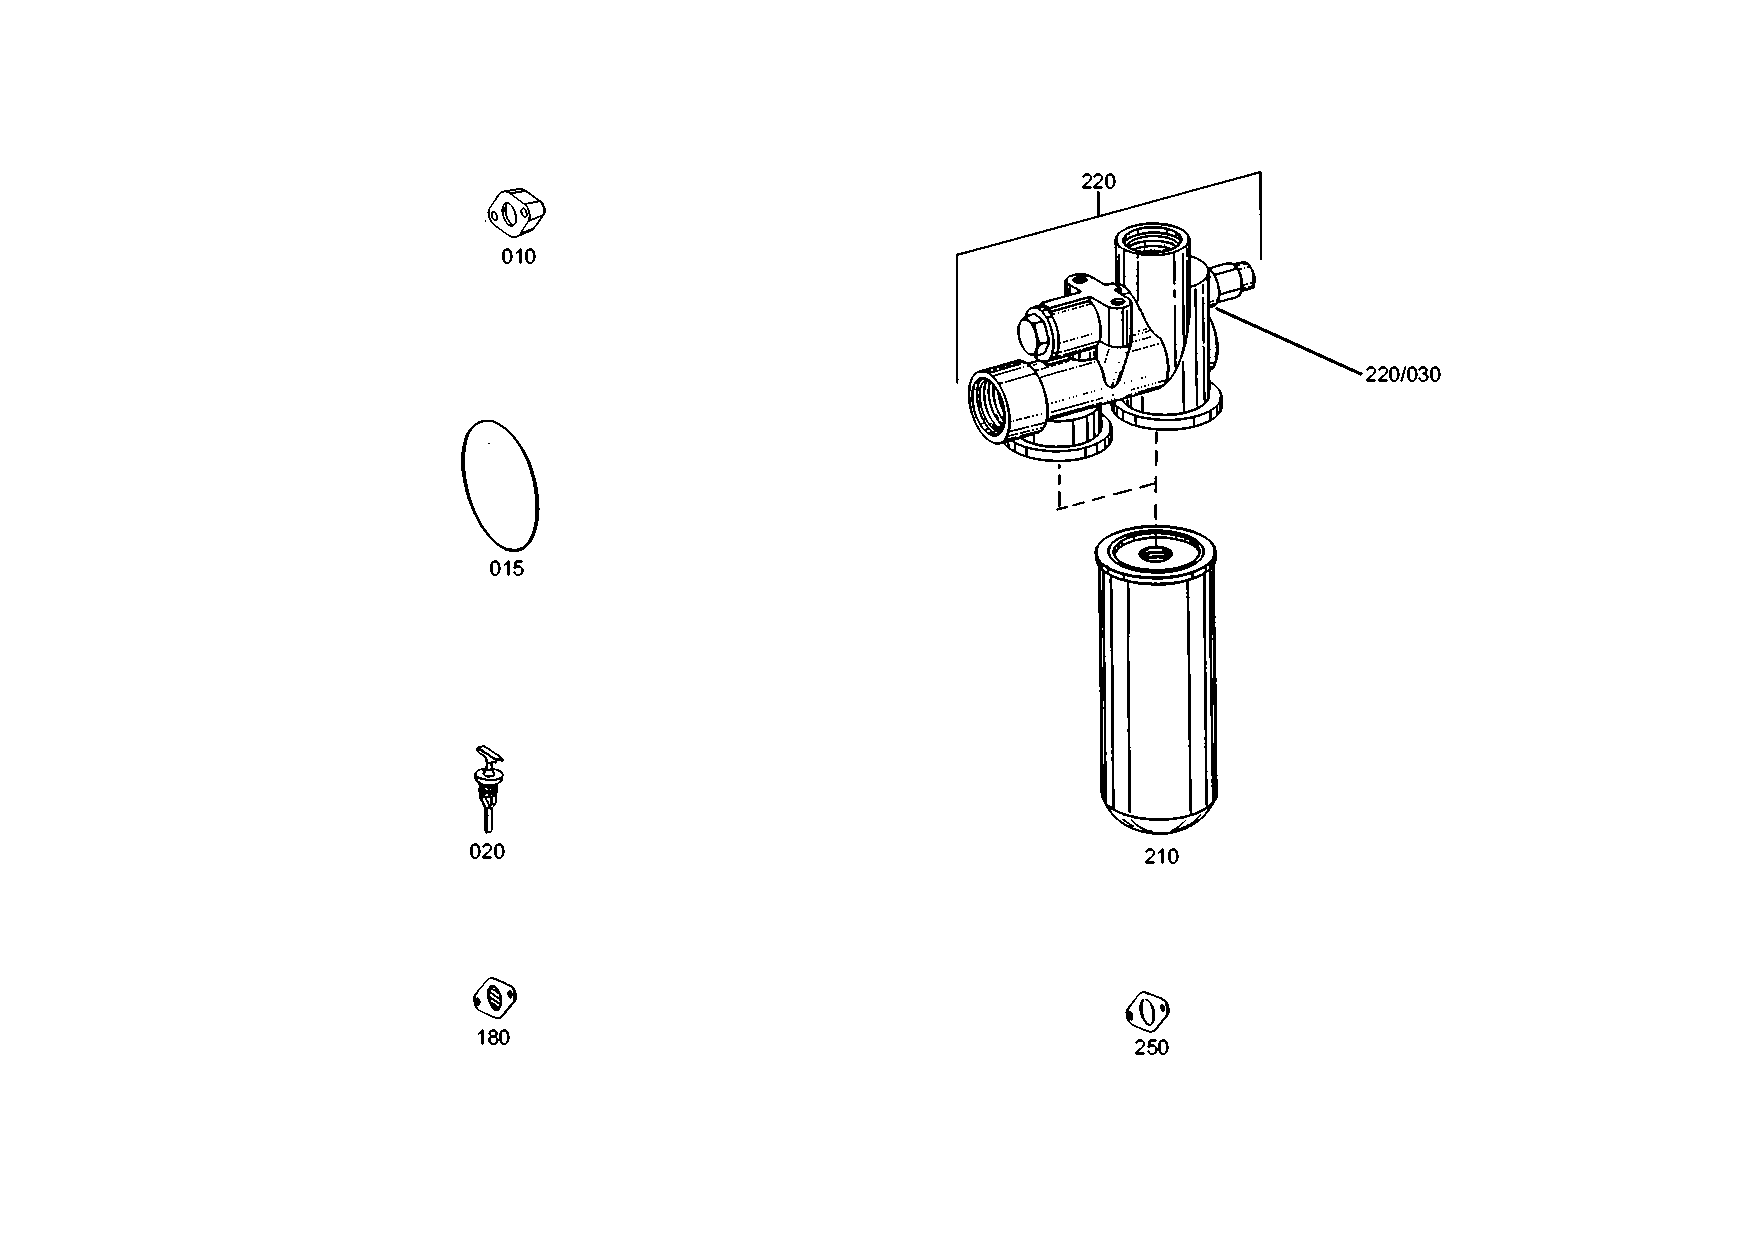 drawing for NOELL GMBH 141181115 - FILTER HEAD (figure 5)